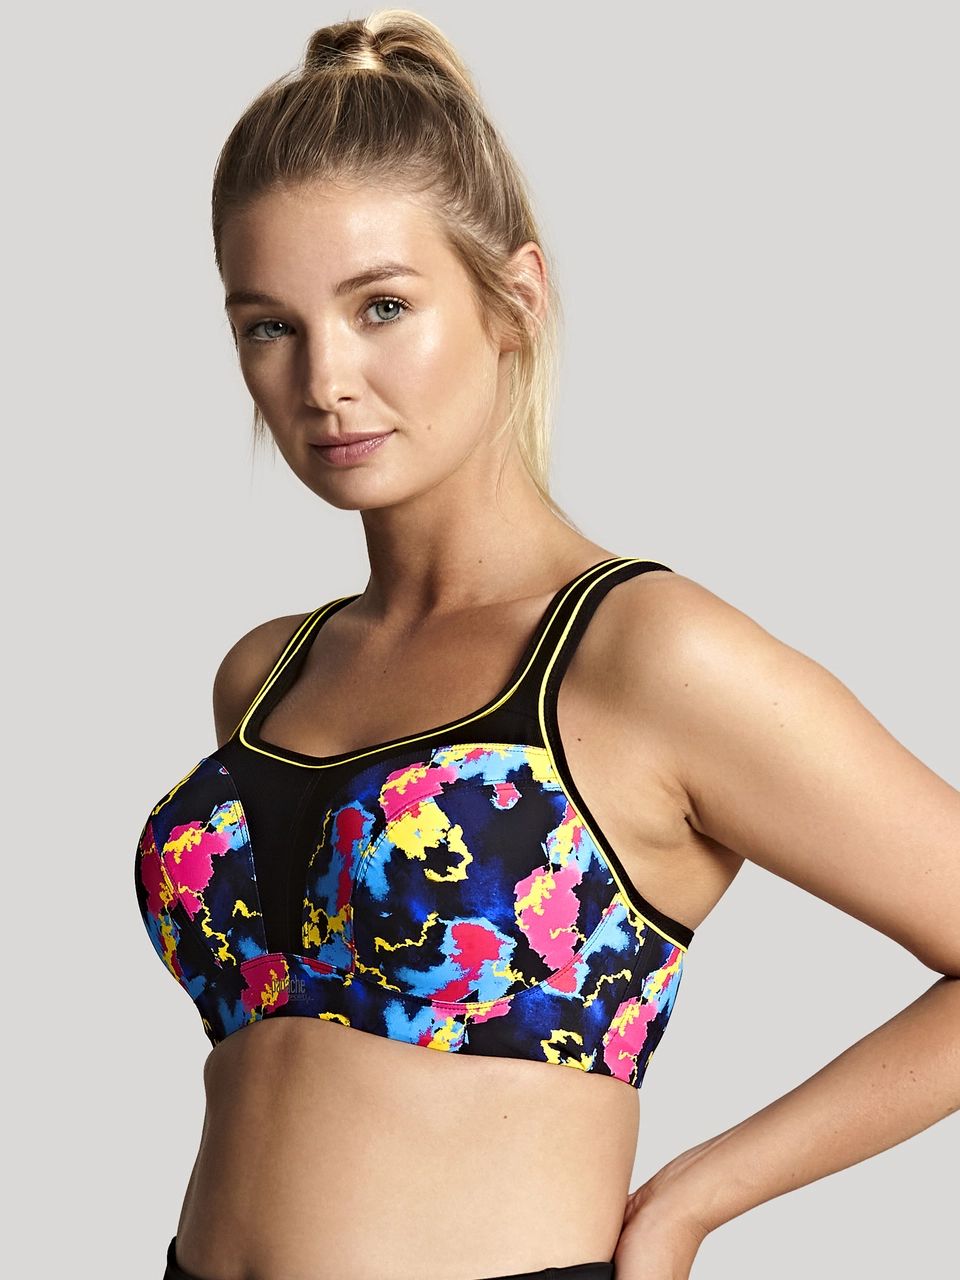 PANACHE Wired Sports Bra 5021 - Electric Print – The Lingerie Bar